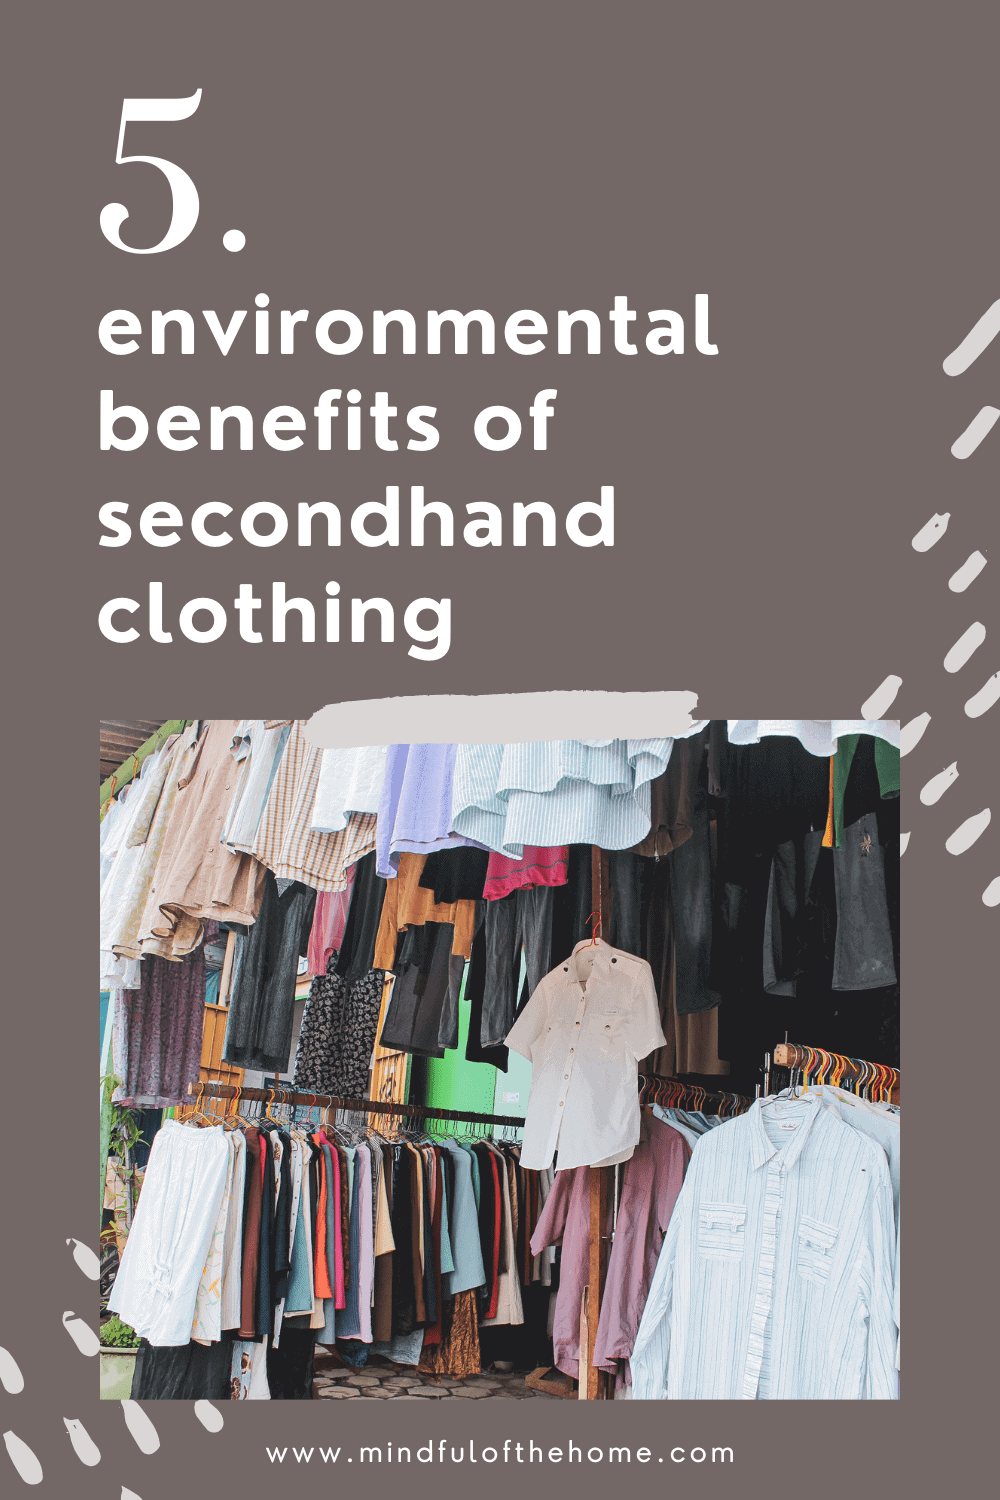 Sustainability Tip: 7 reasons to buy clothing second-hand rather